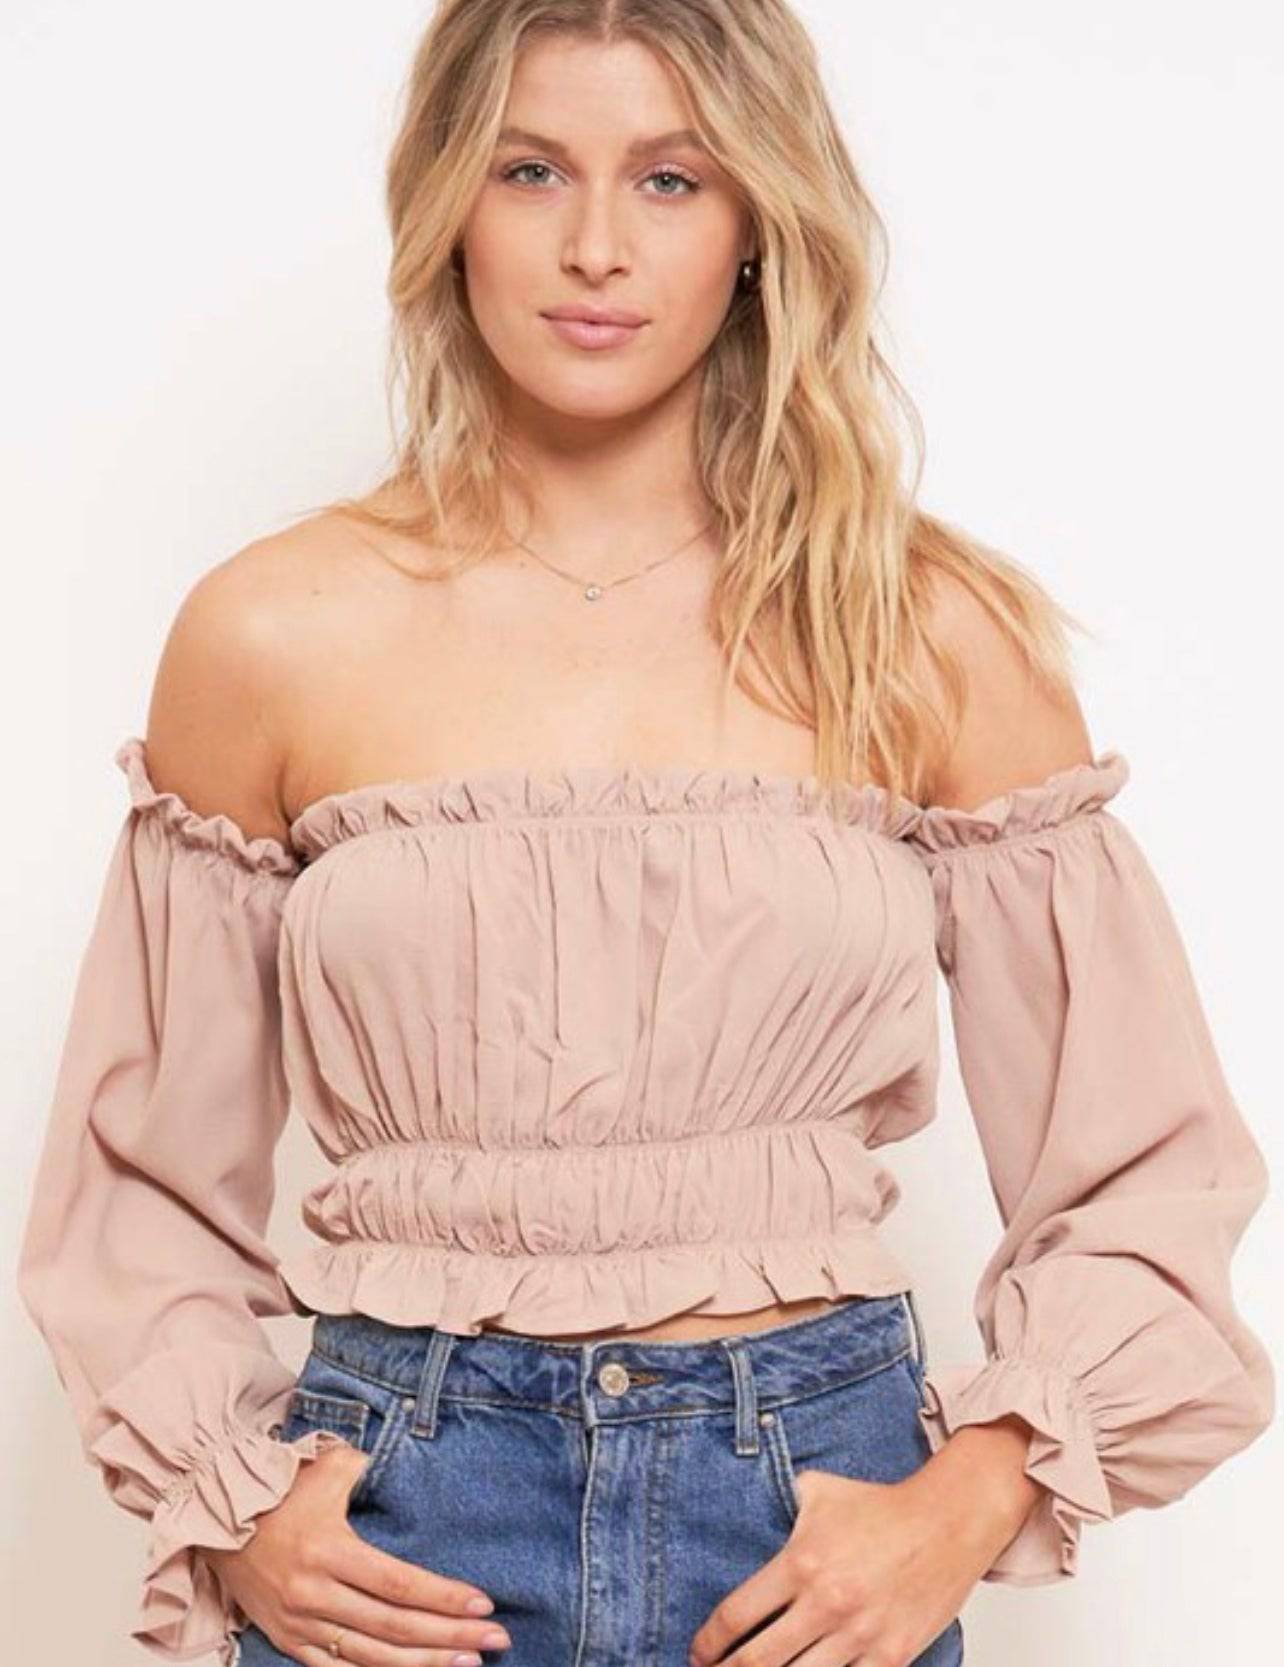 Celine Off Shoulder Top - Style Baby OMG Fashion Boutique - Stylebabyomg - Buy - Aesthetic Baddie Outfits - Babyboo - OOTD - Shie 